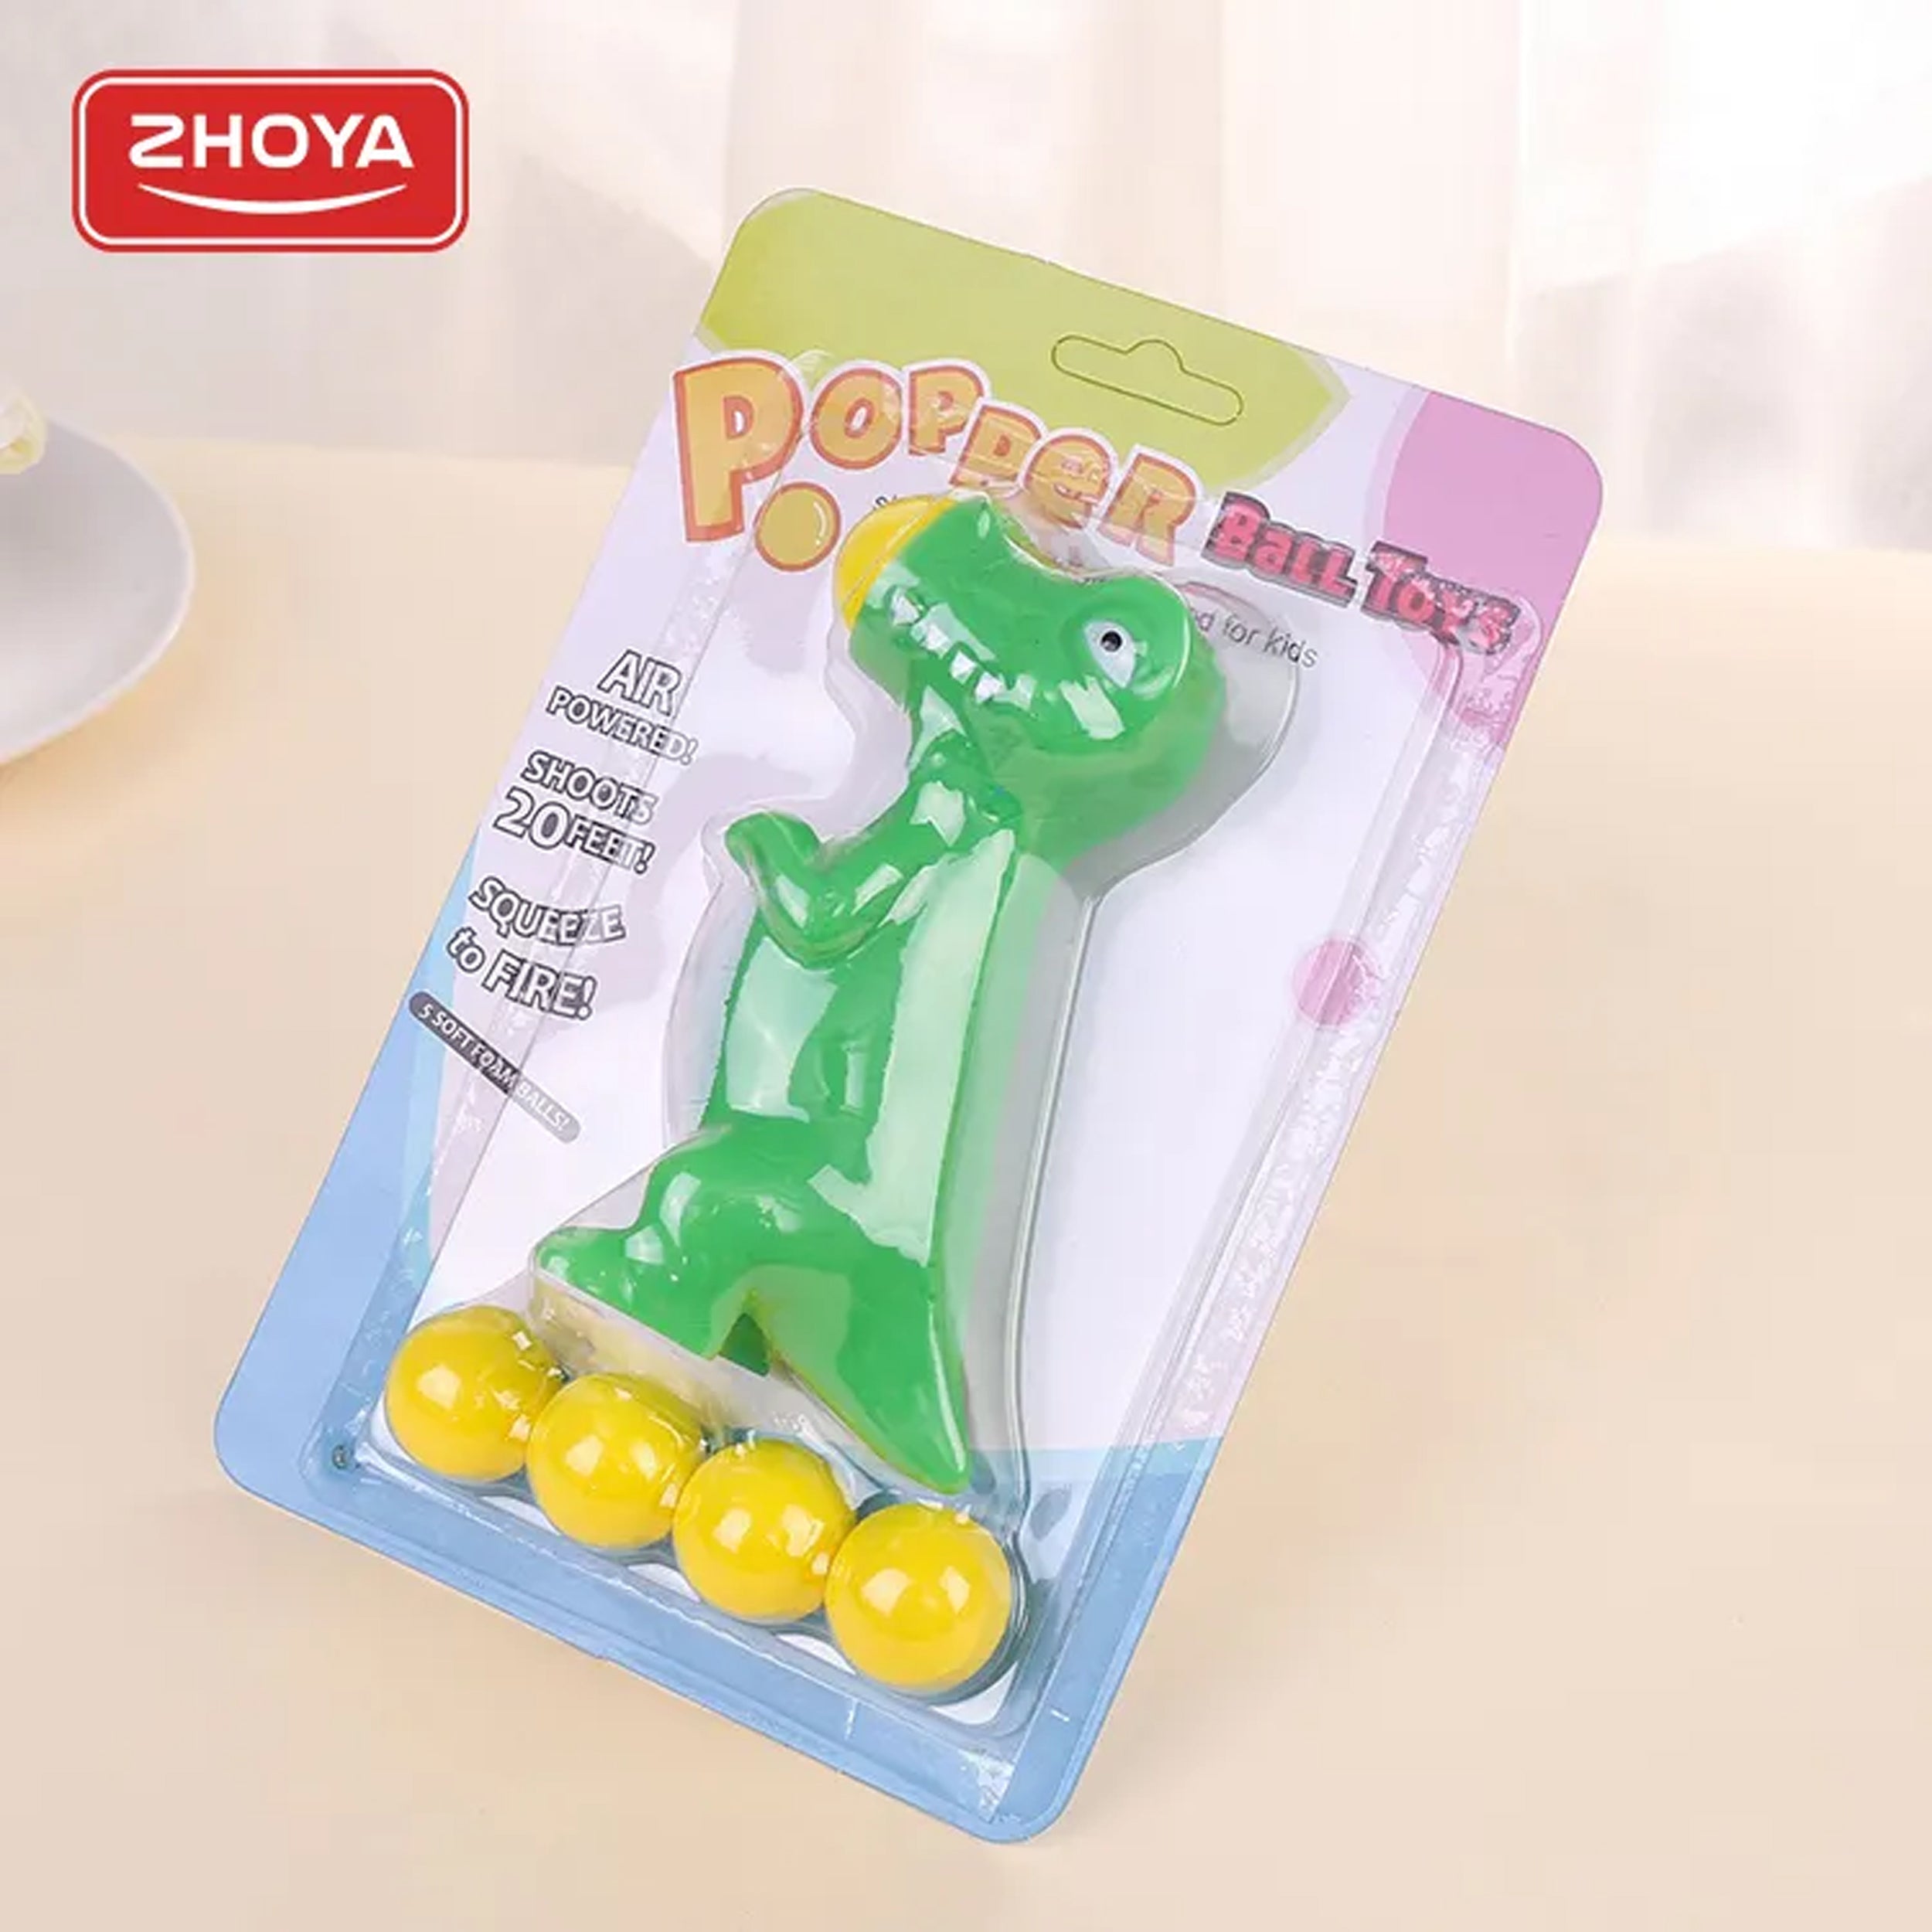 Unicorn Squeeze Popper With 5 Balls Toy